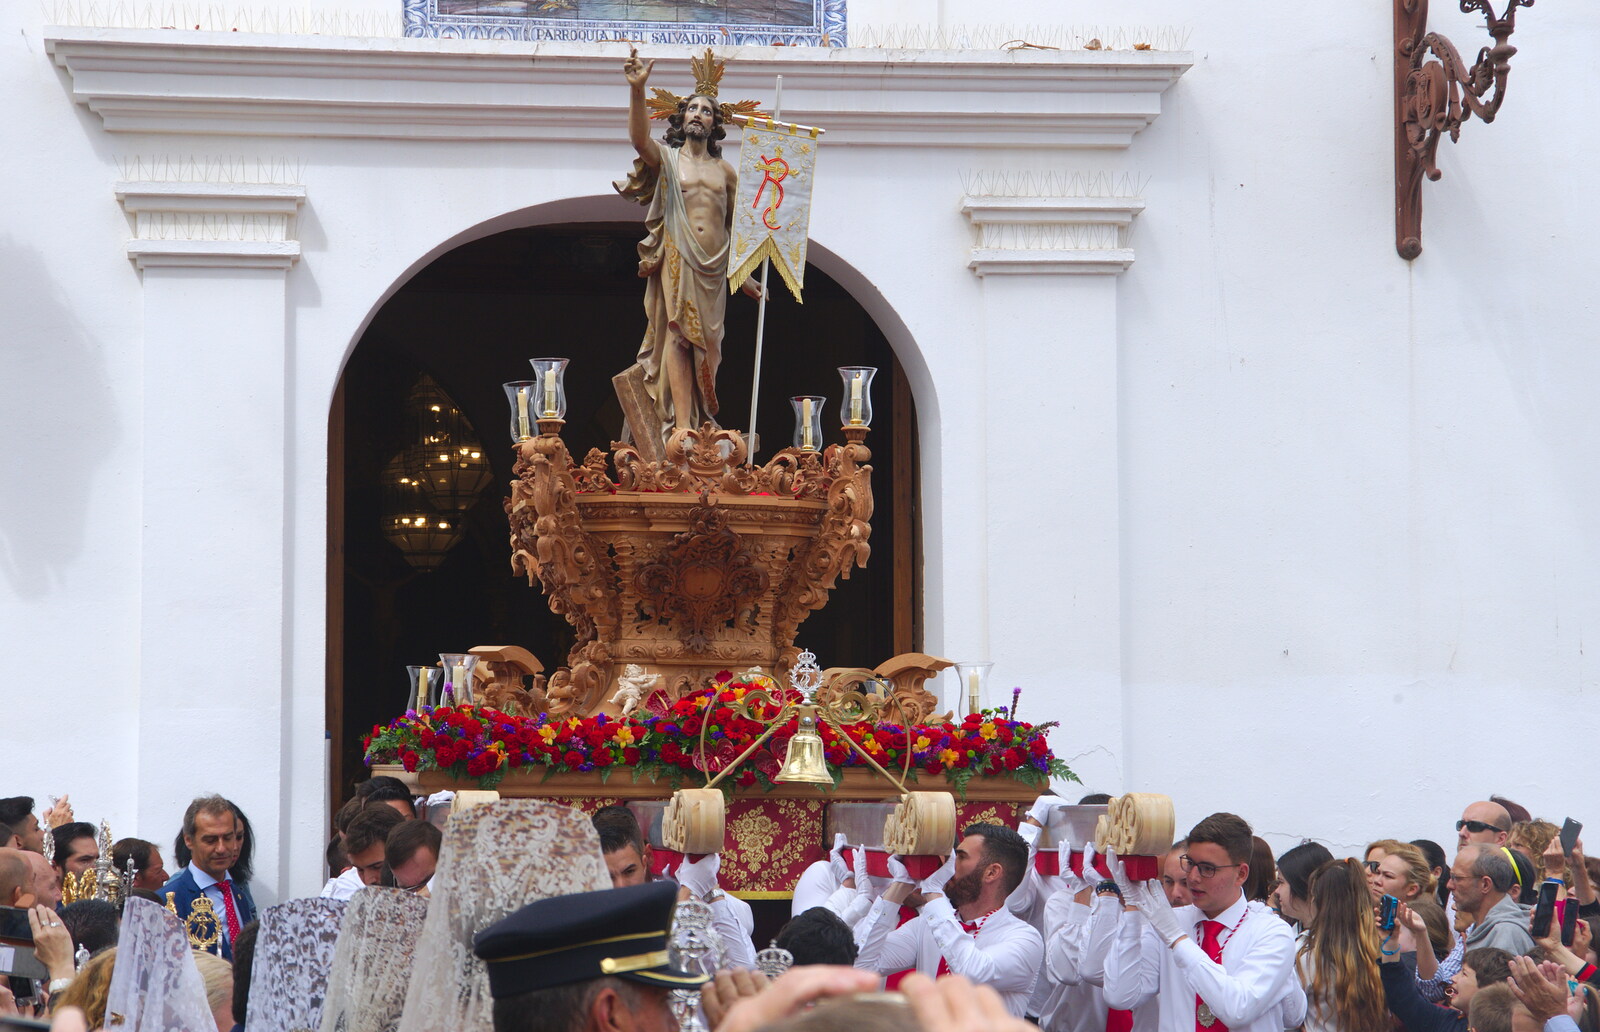 A large statue of Jesus is next out of the church from An Easter Parade, Nerja, Andalusia, Spain - 21st April 2019